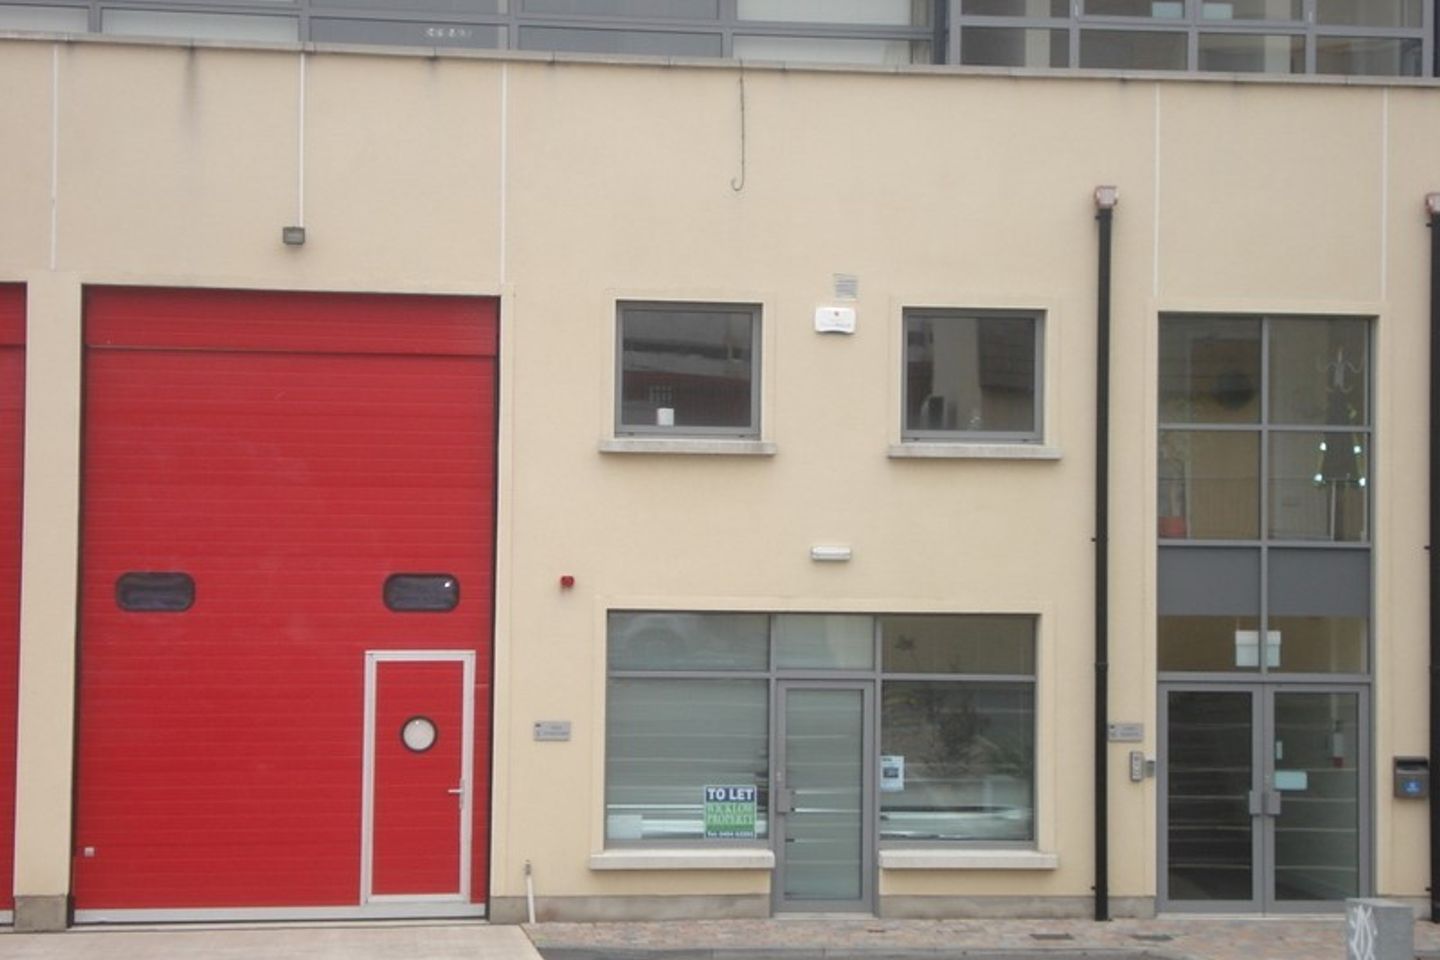 Unit 3, Block 1, Broomhall Business and Enterprise Park, Rathnew, Co. Wicklow